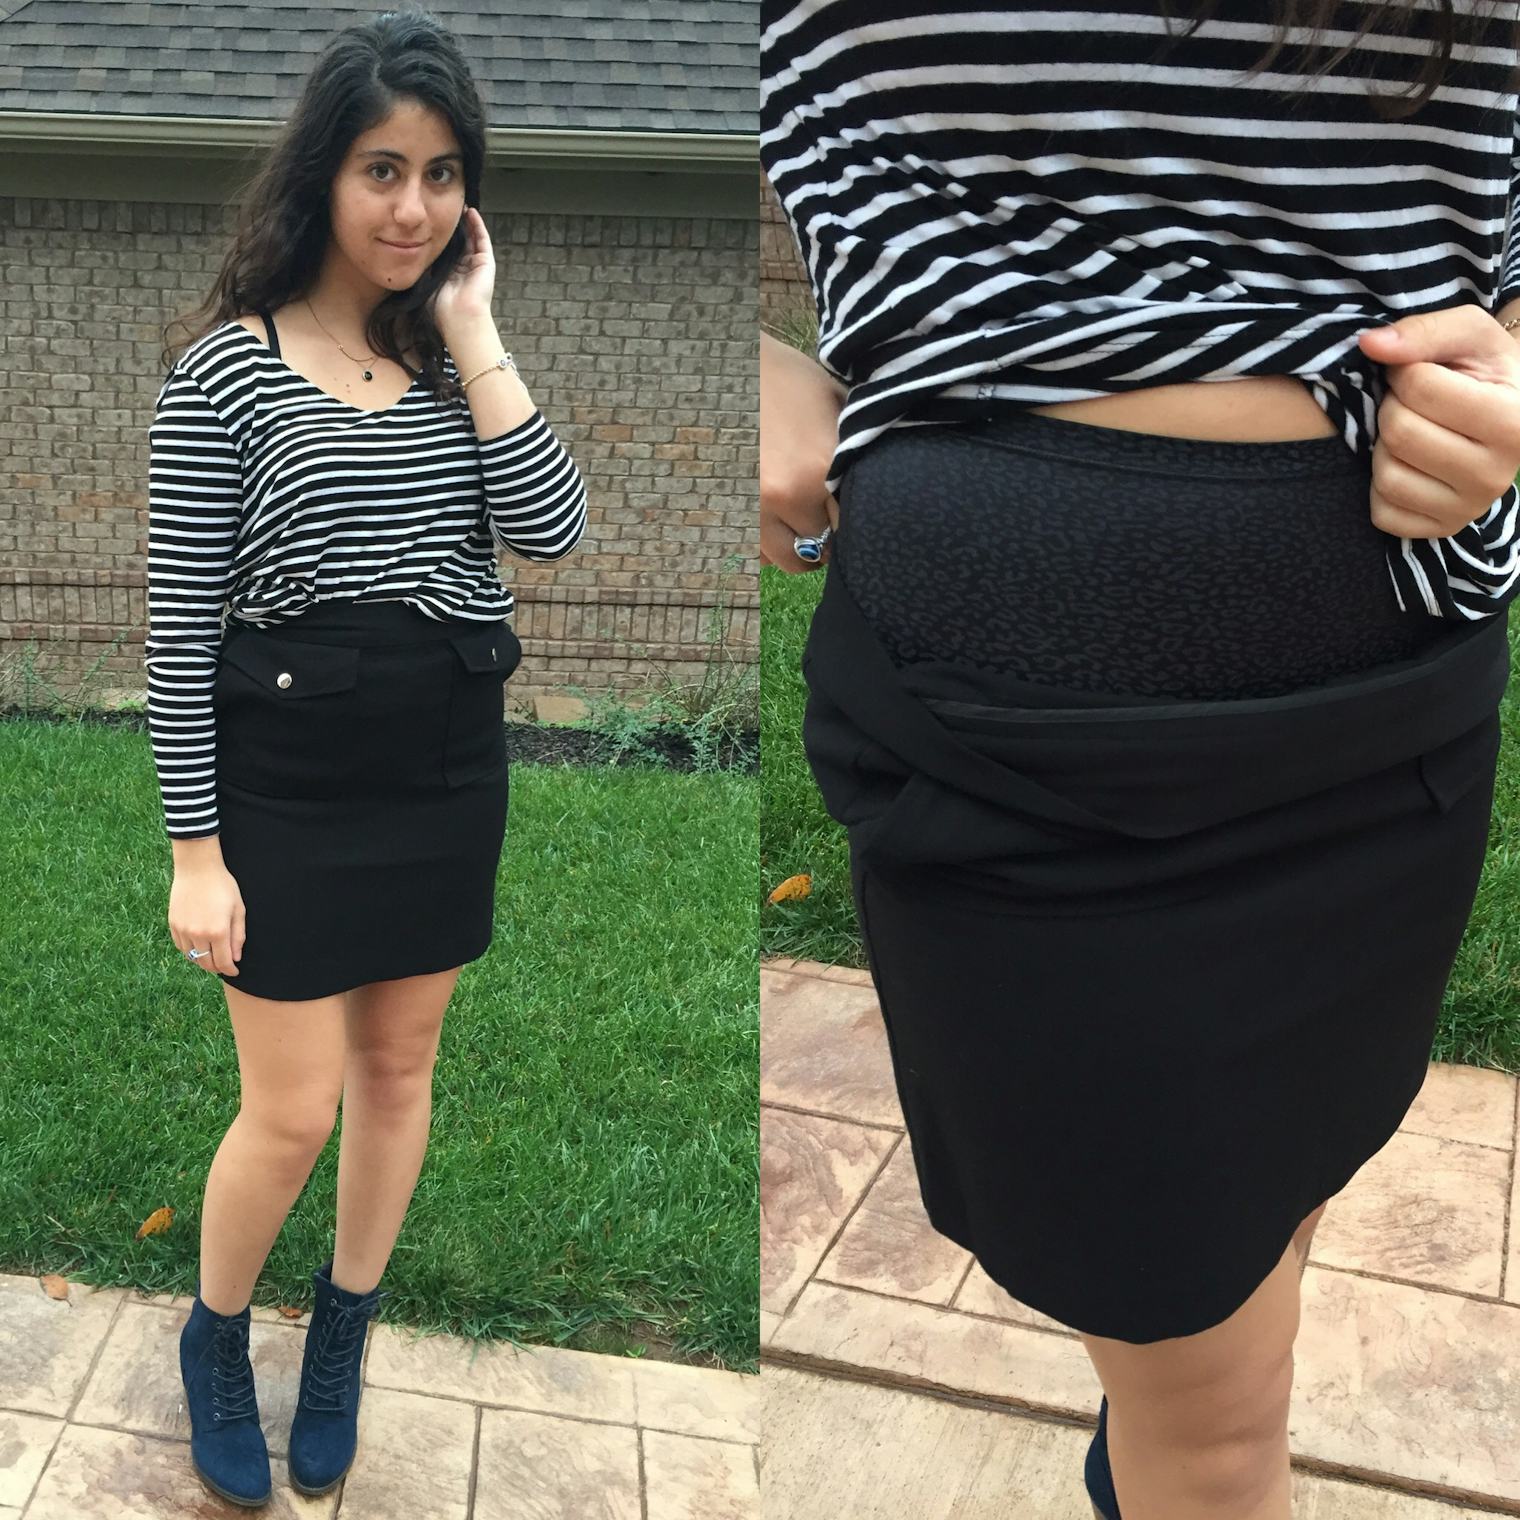 I Tried Four Different Types Of Shapewear & This Is What Happened — PHOTOS